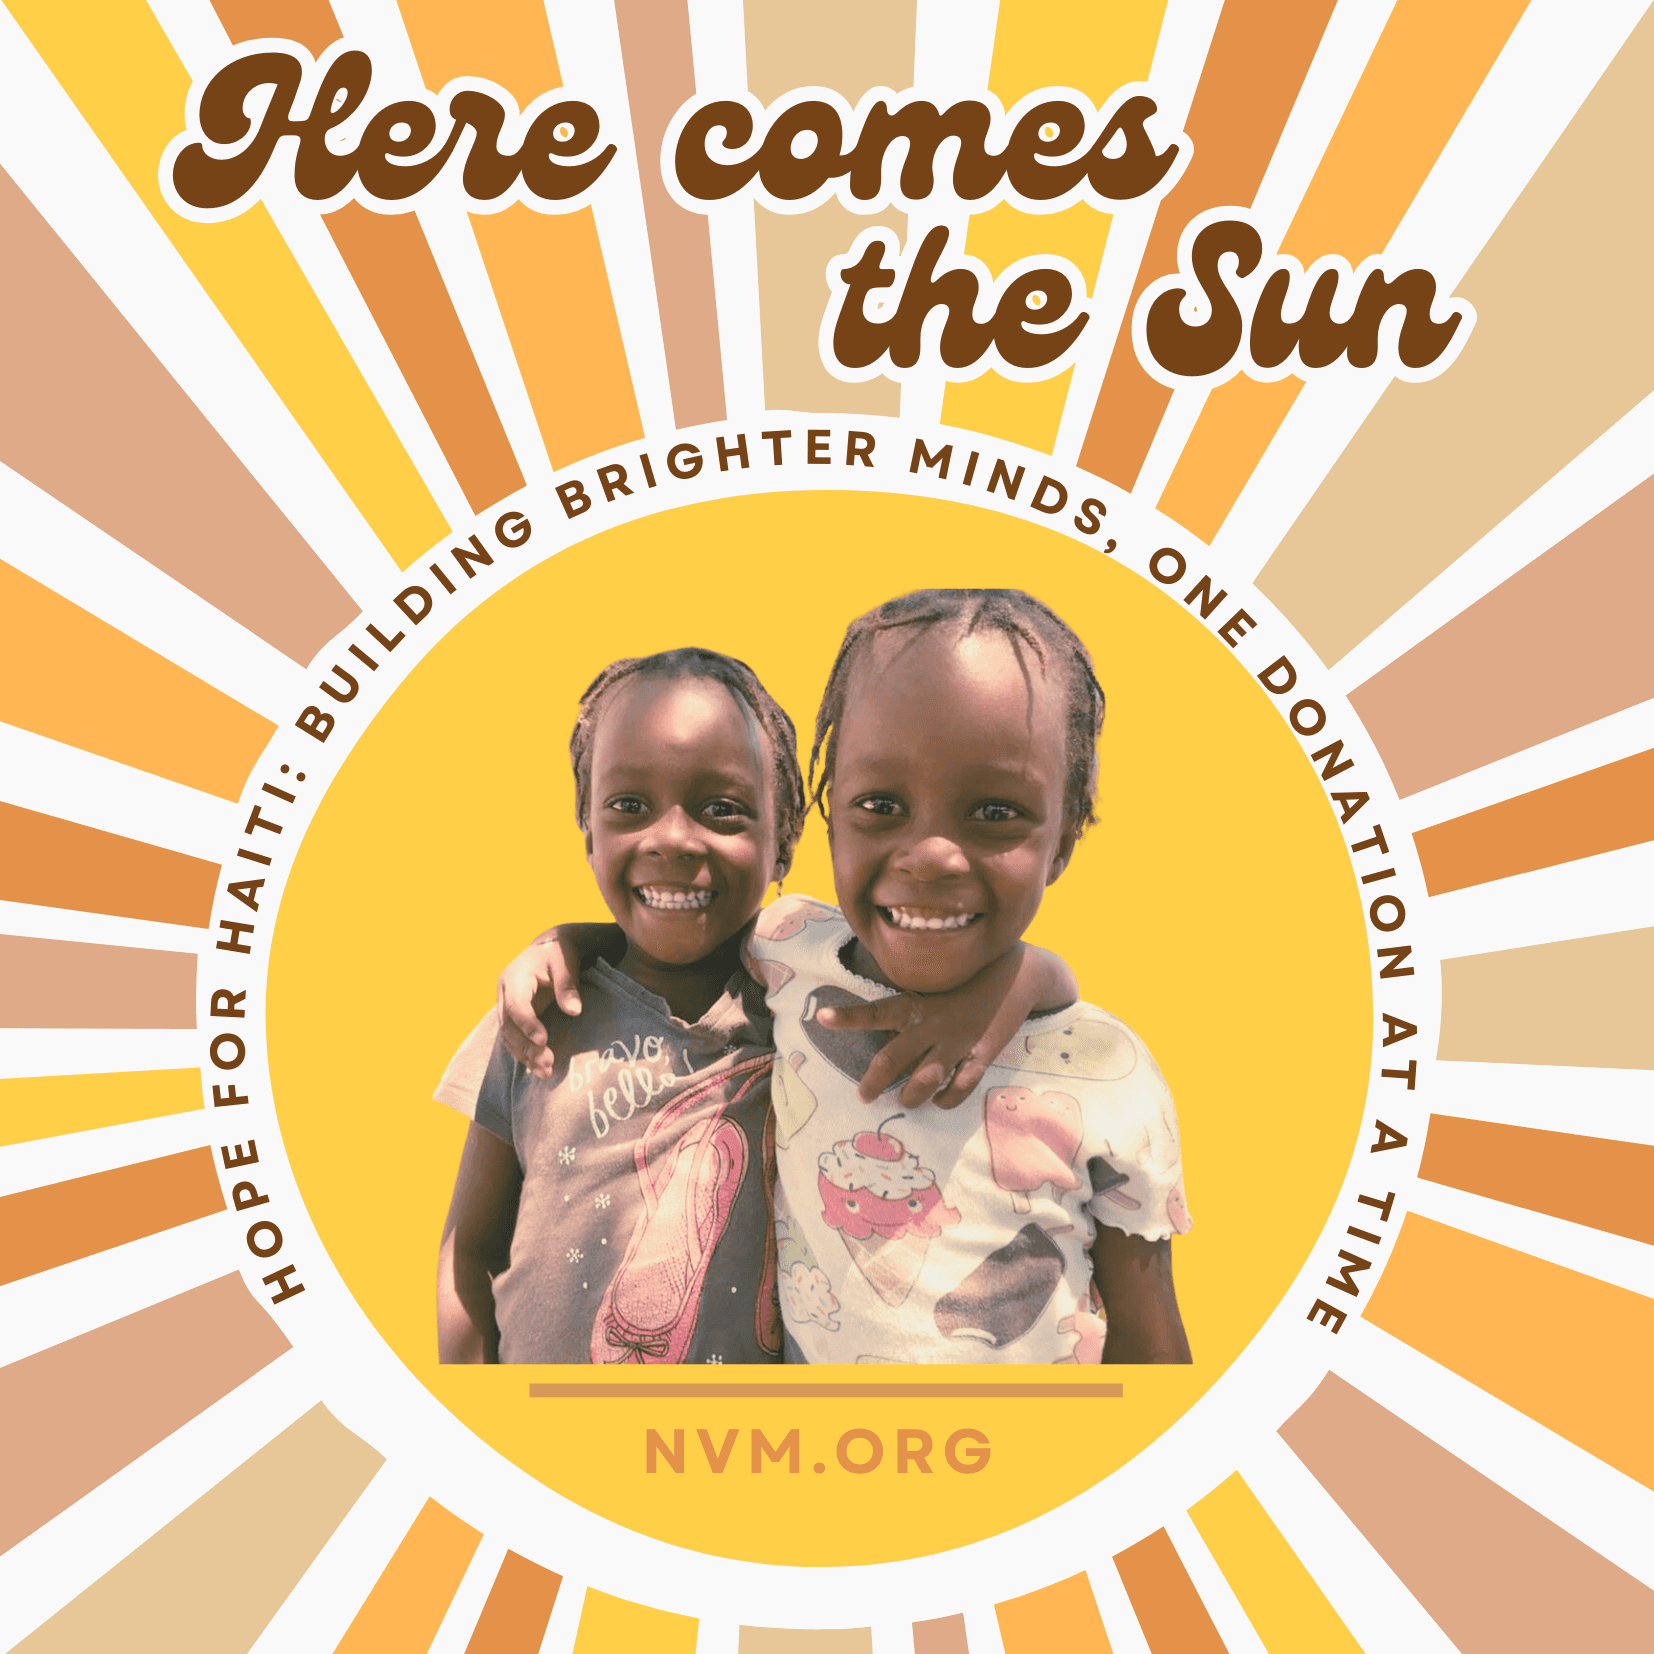 Year End Campaign - Here Comes the Sun